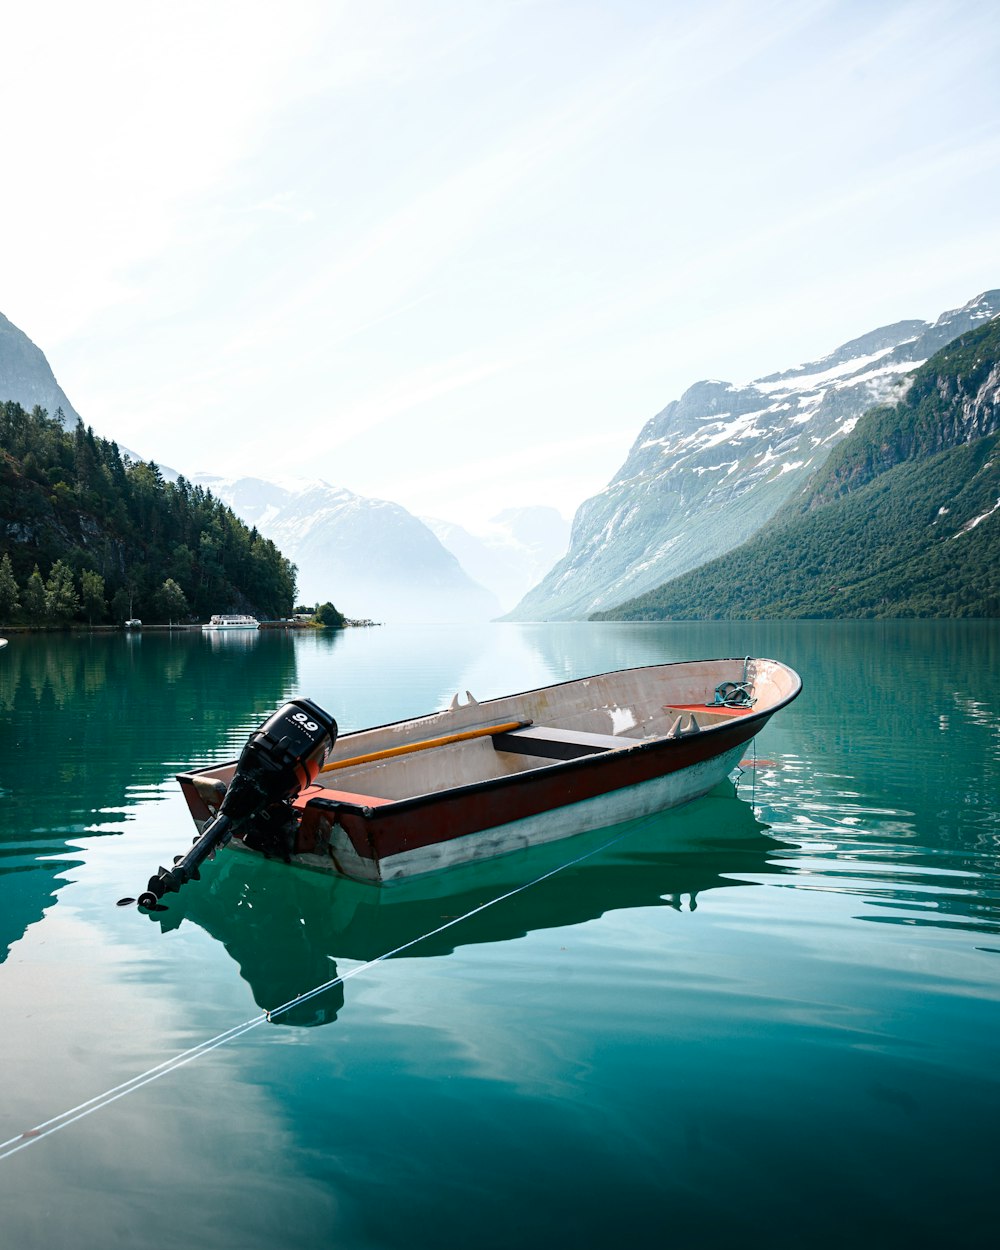 brown and white boat on lake during daytime